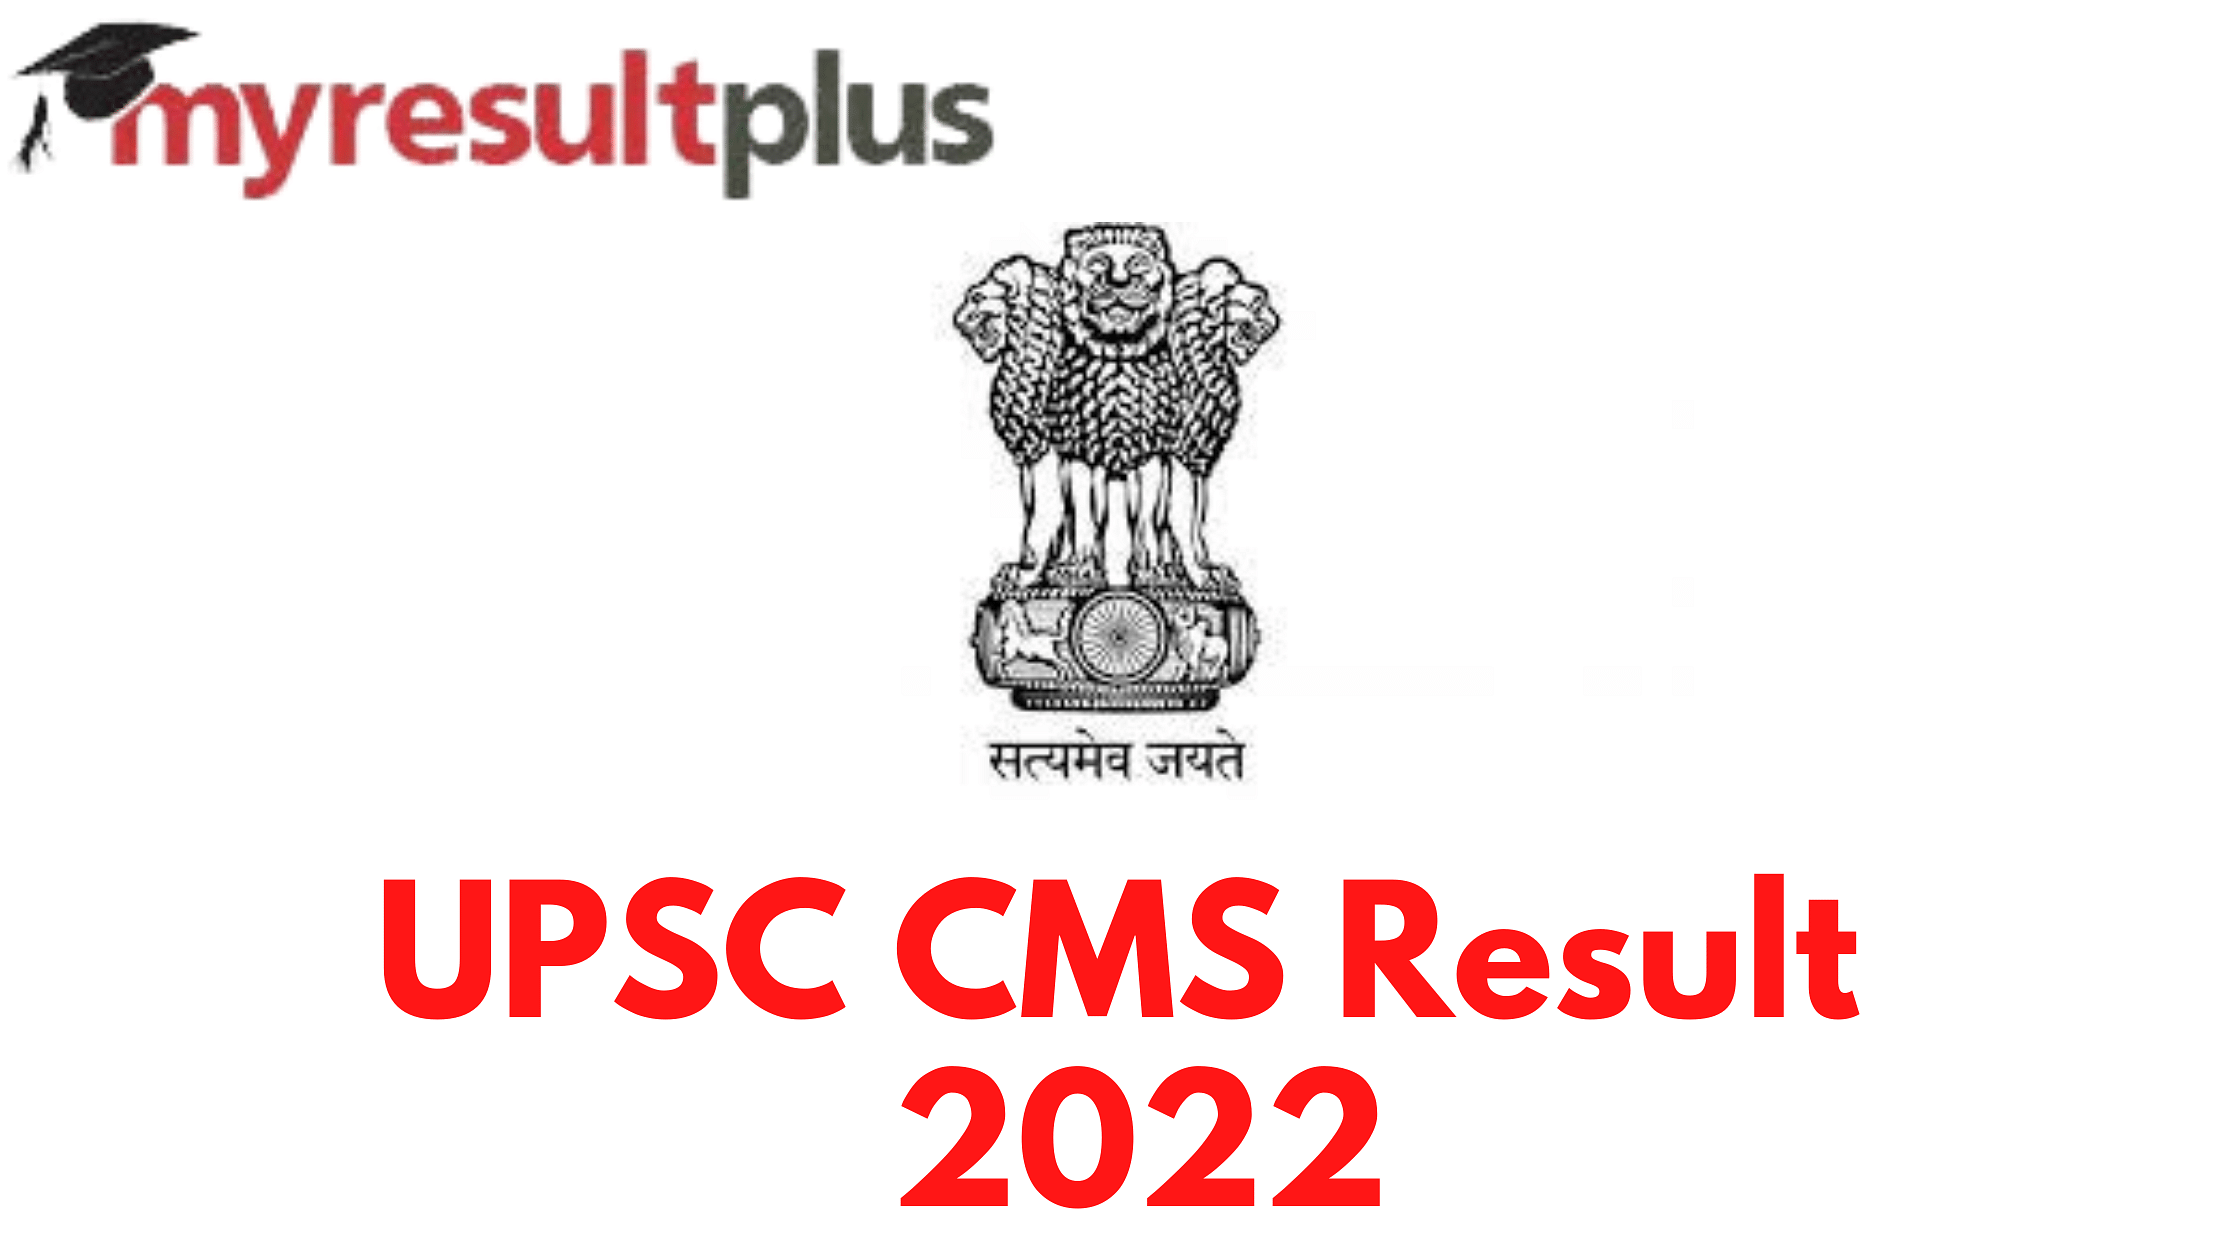 UPSC CMS Result 2022 Out, Here's Direct Link to Download